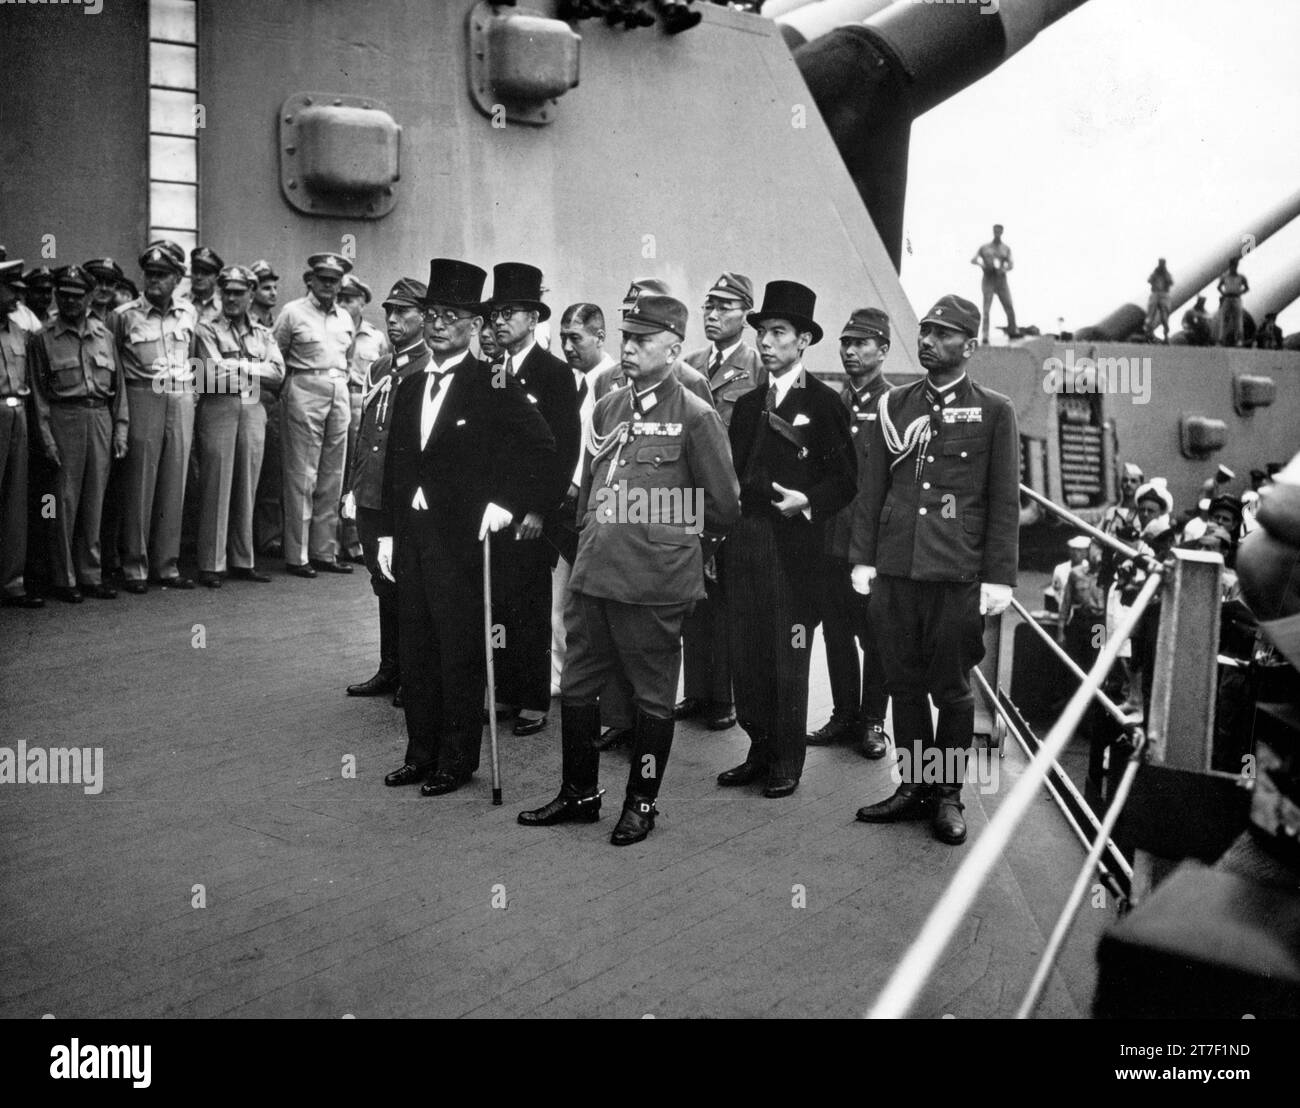 VJ Day. Surrender of Japan, Tokyo Bay, 2 September 1945: Representatives of the Empire of Japan on board USS Missouri (BB-63) during the surrender ceremonies. Standing in front are: Foreign Minister Mamoru Shigemitsu (wearing top hat) and General Yoshijirō Umezu, Chief of the Army General Staff. Stock Photo